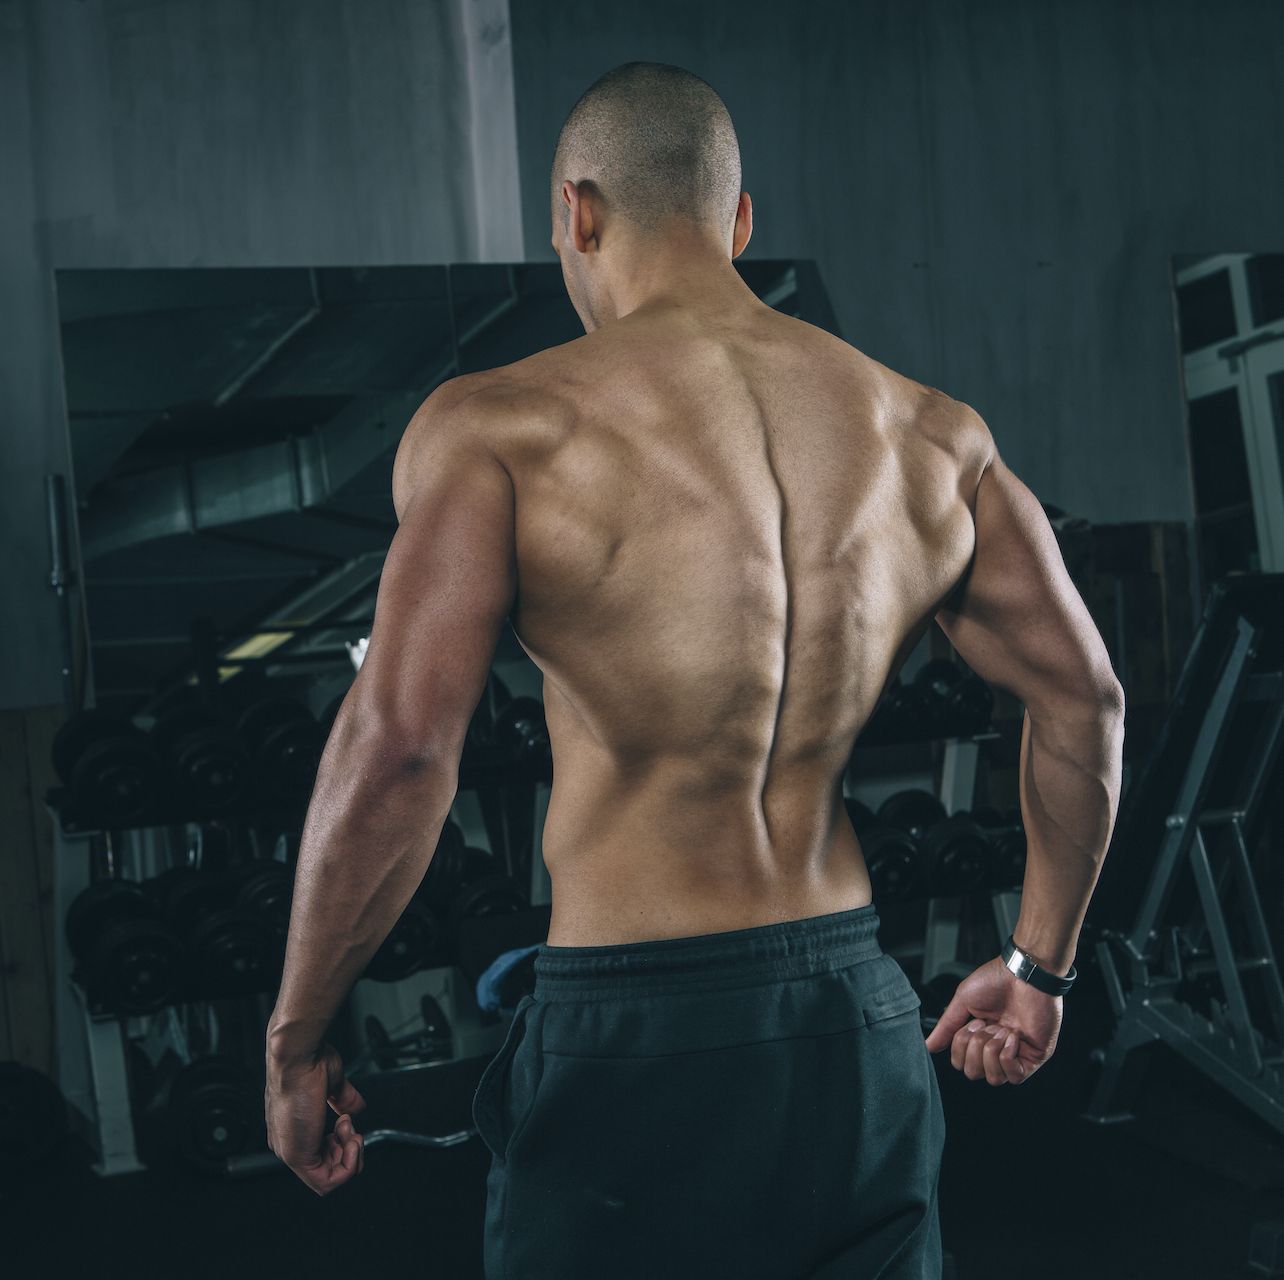 The V-Taper Is a Major Physique Goal. Here's Why.